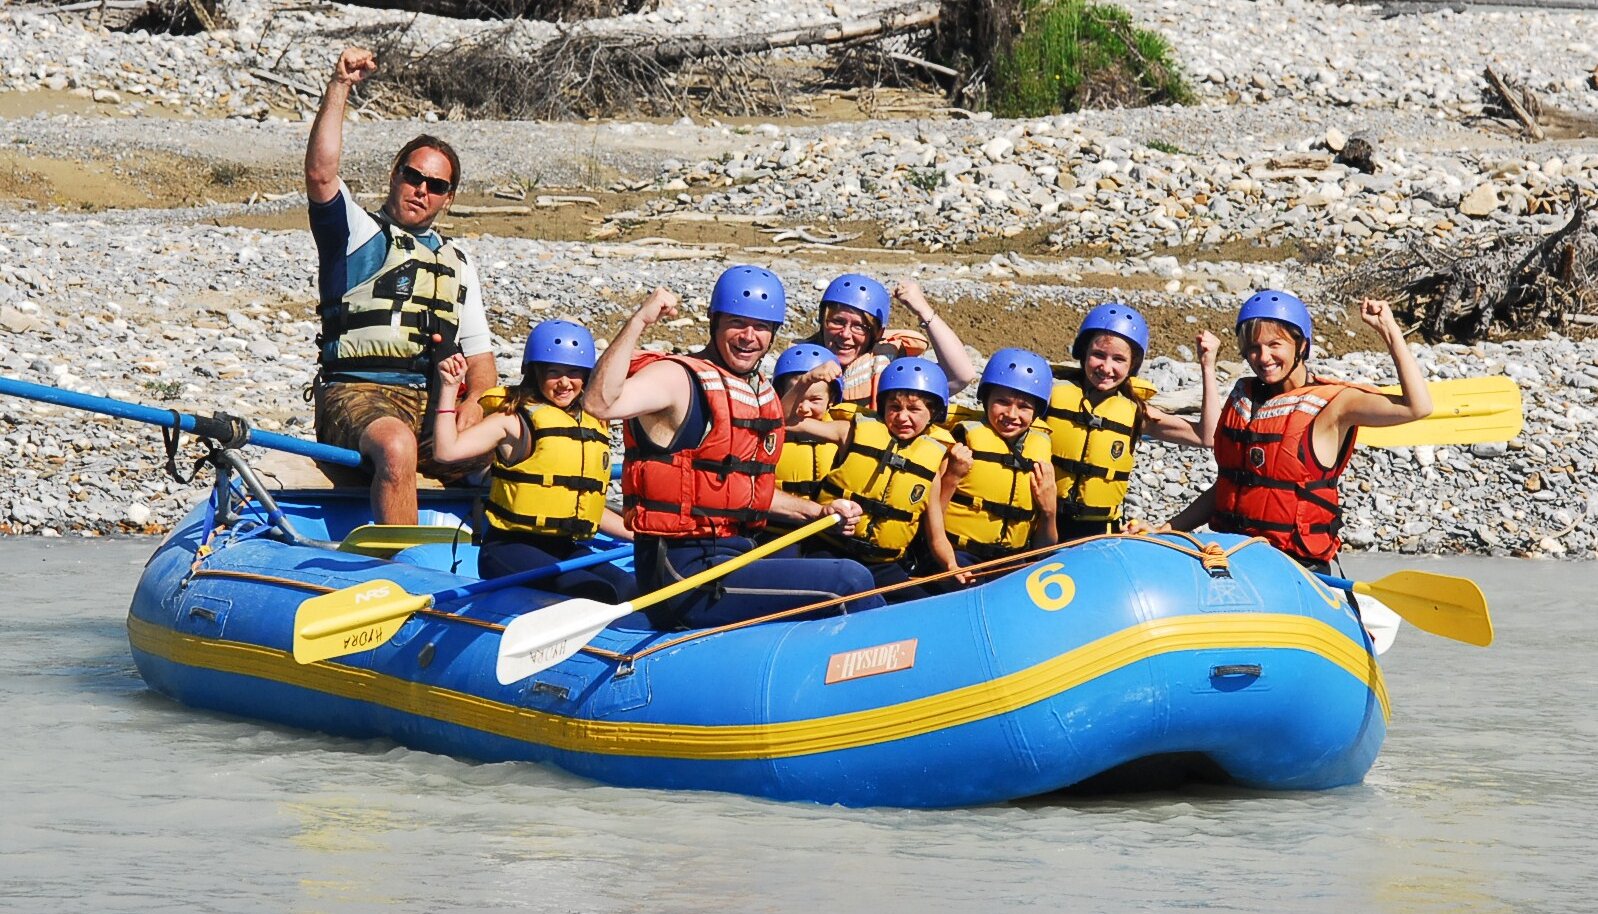 Kids getting pumped to raft on the Kicking Horse River